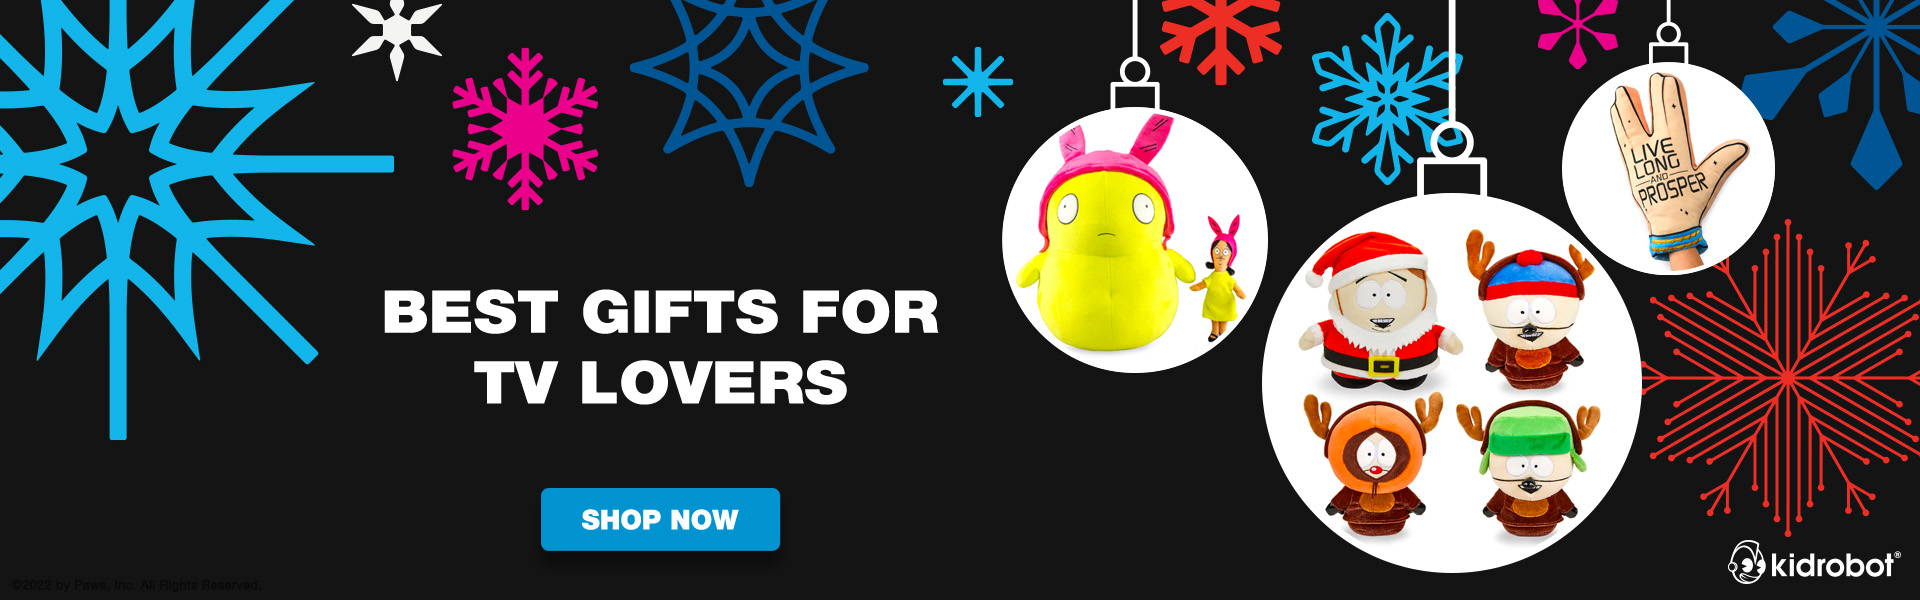 Best Gifts for the TV Lover - Best TV Shows Gifts at Kidrobot.com - Star Trek, Bobs Burgers, South Park and more